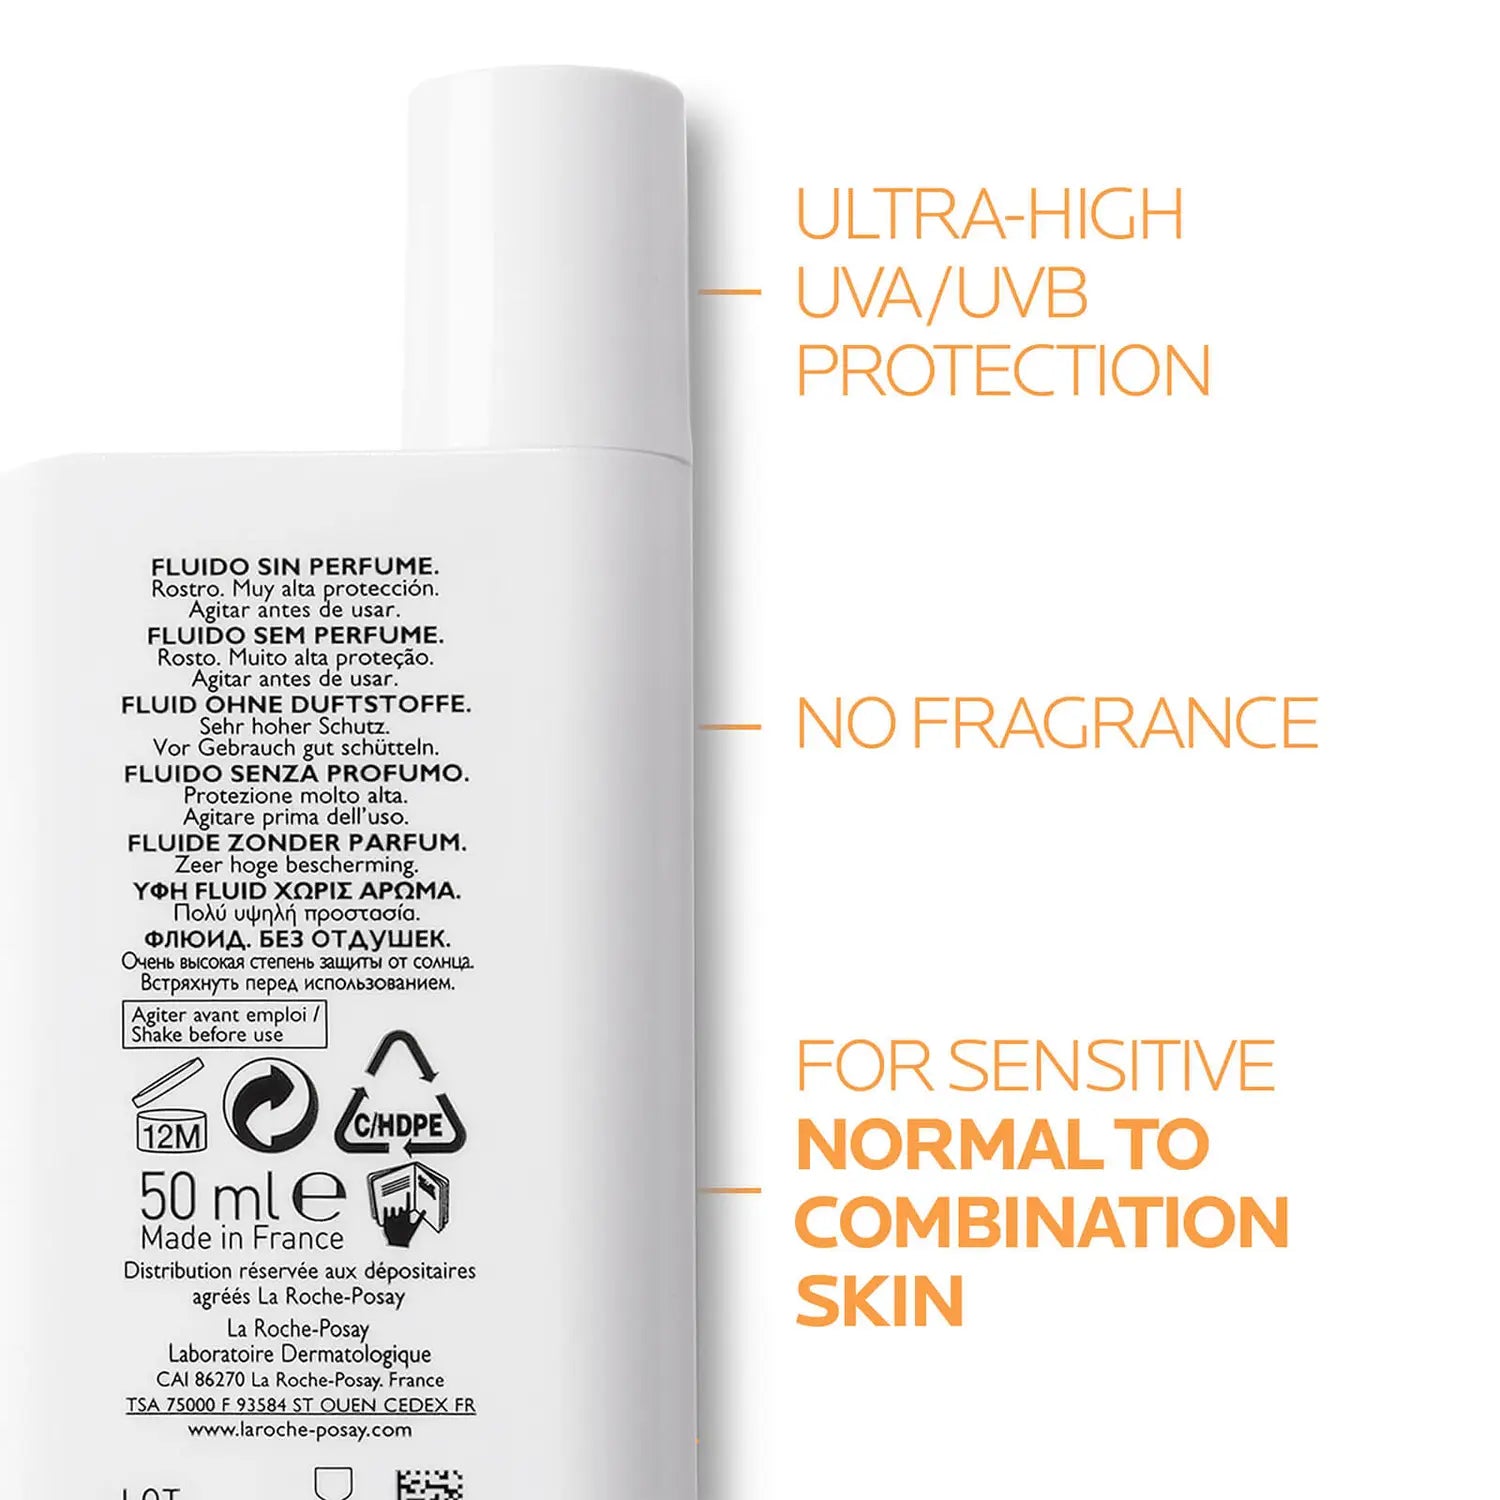 Anthelios UVmune Fluid Sunscreen for Face 50 mL Tinted